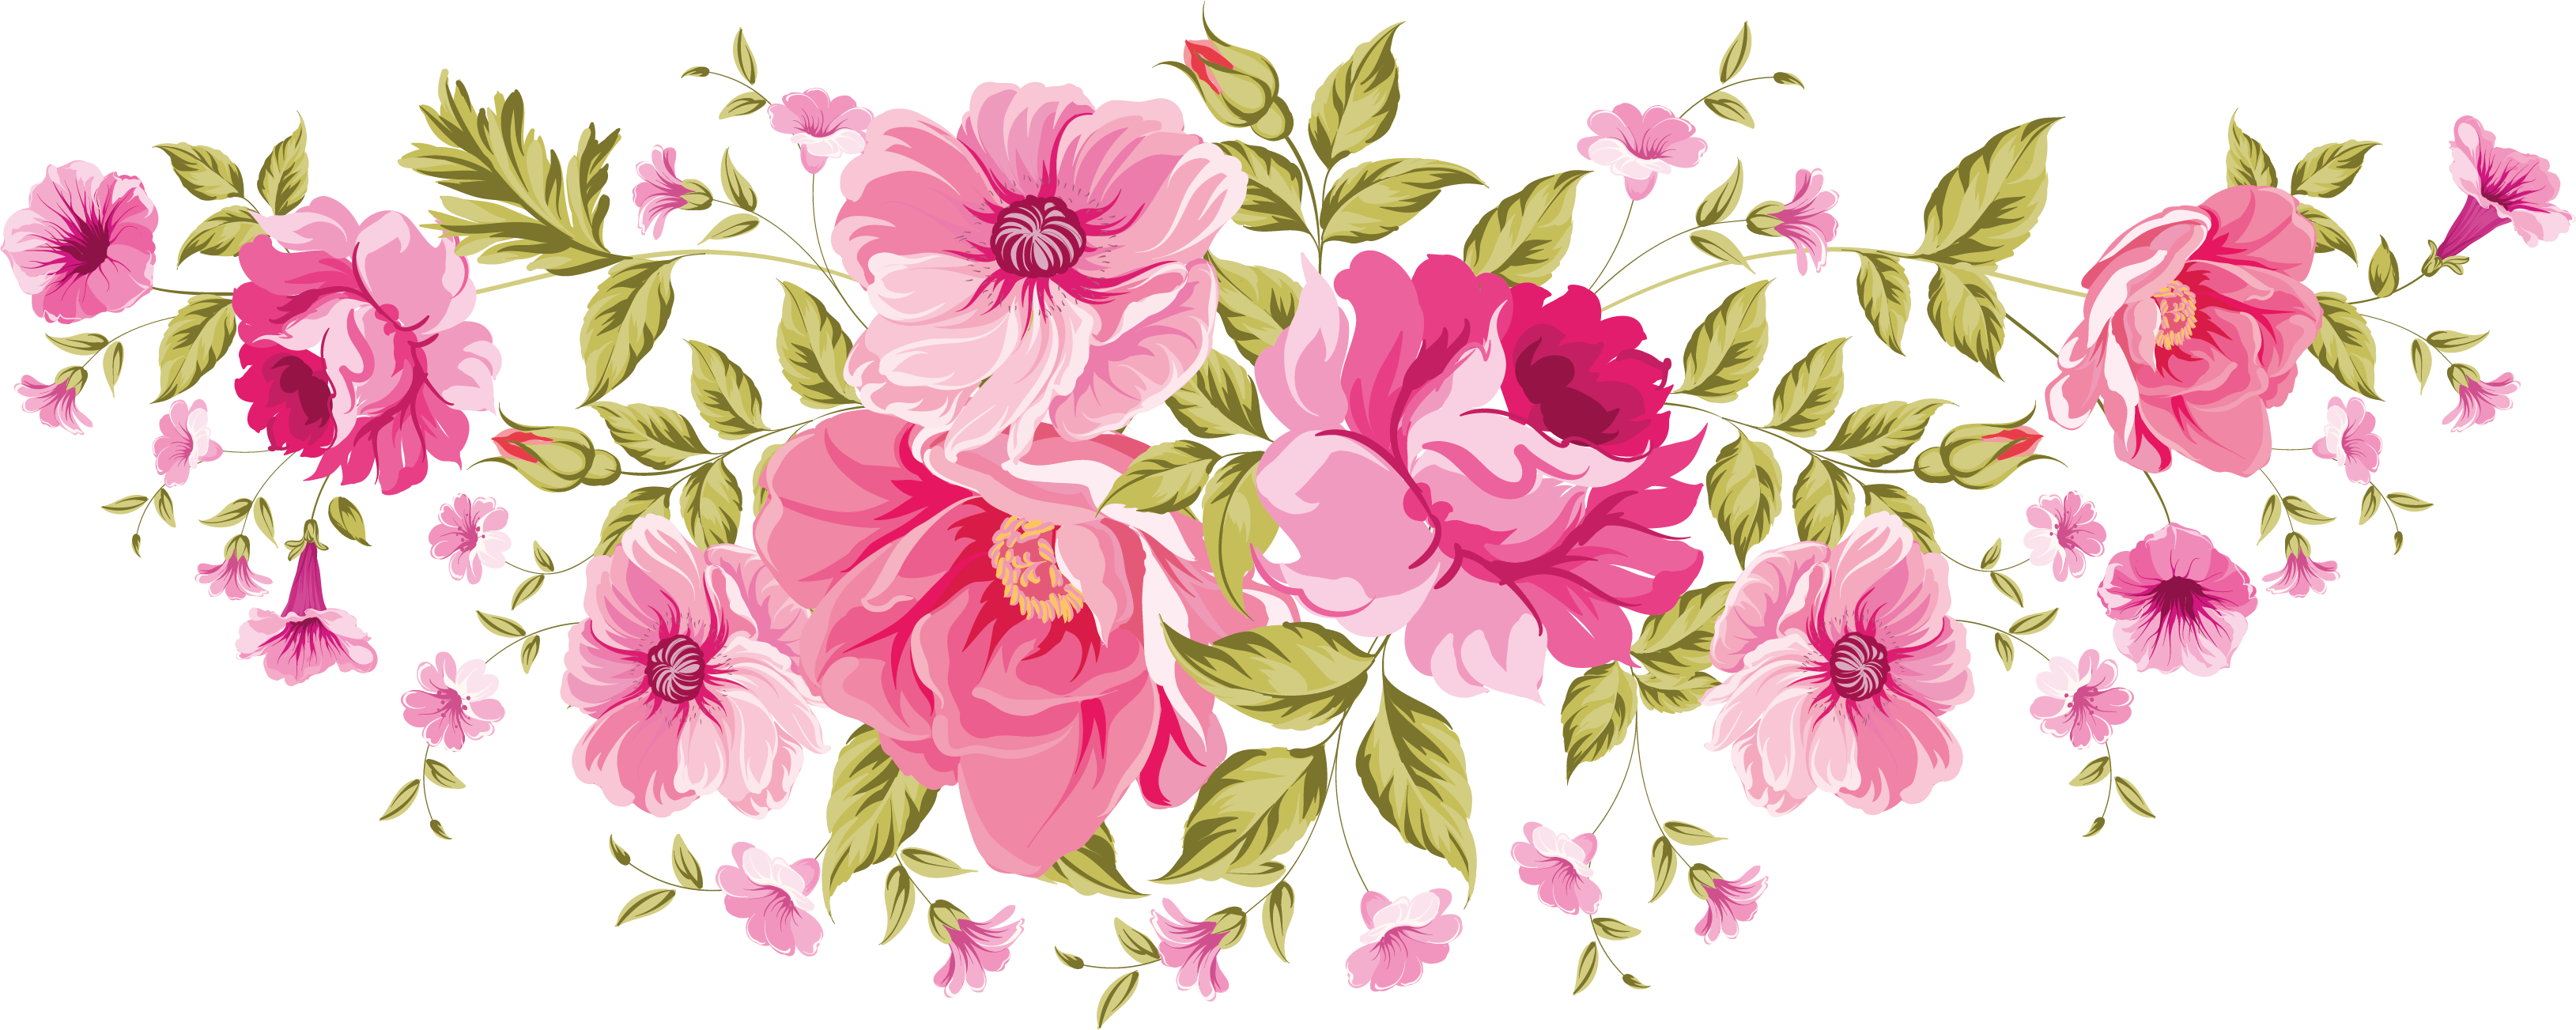 pink flowers for invitation
